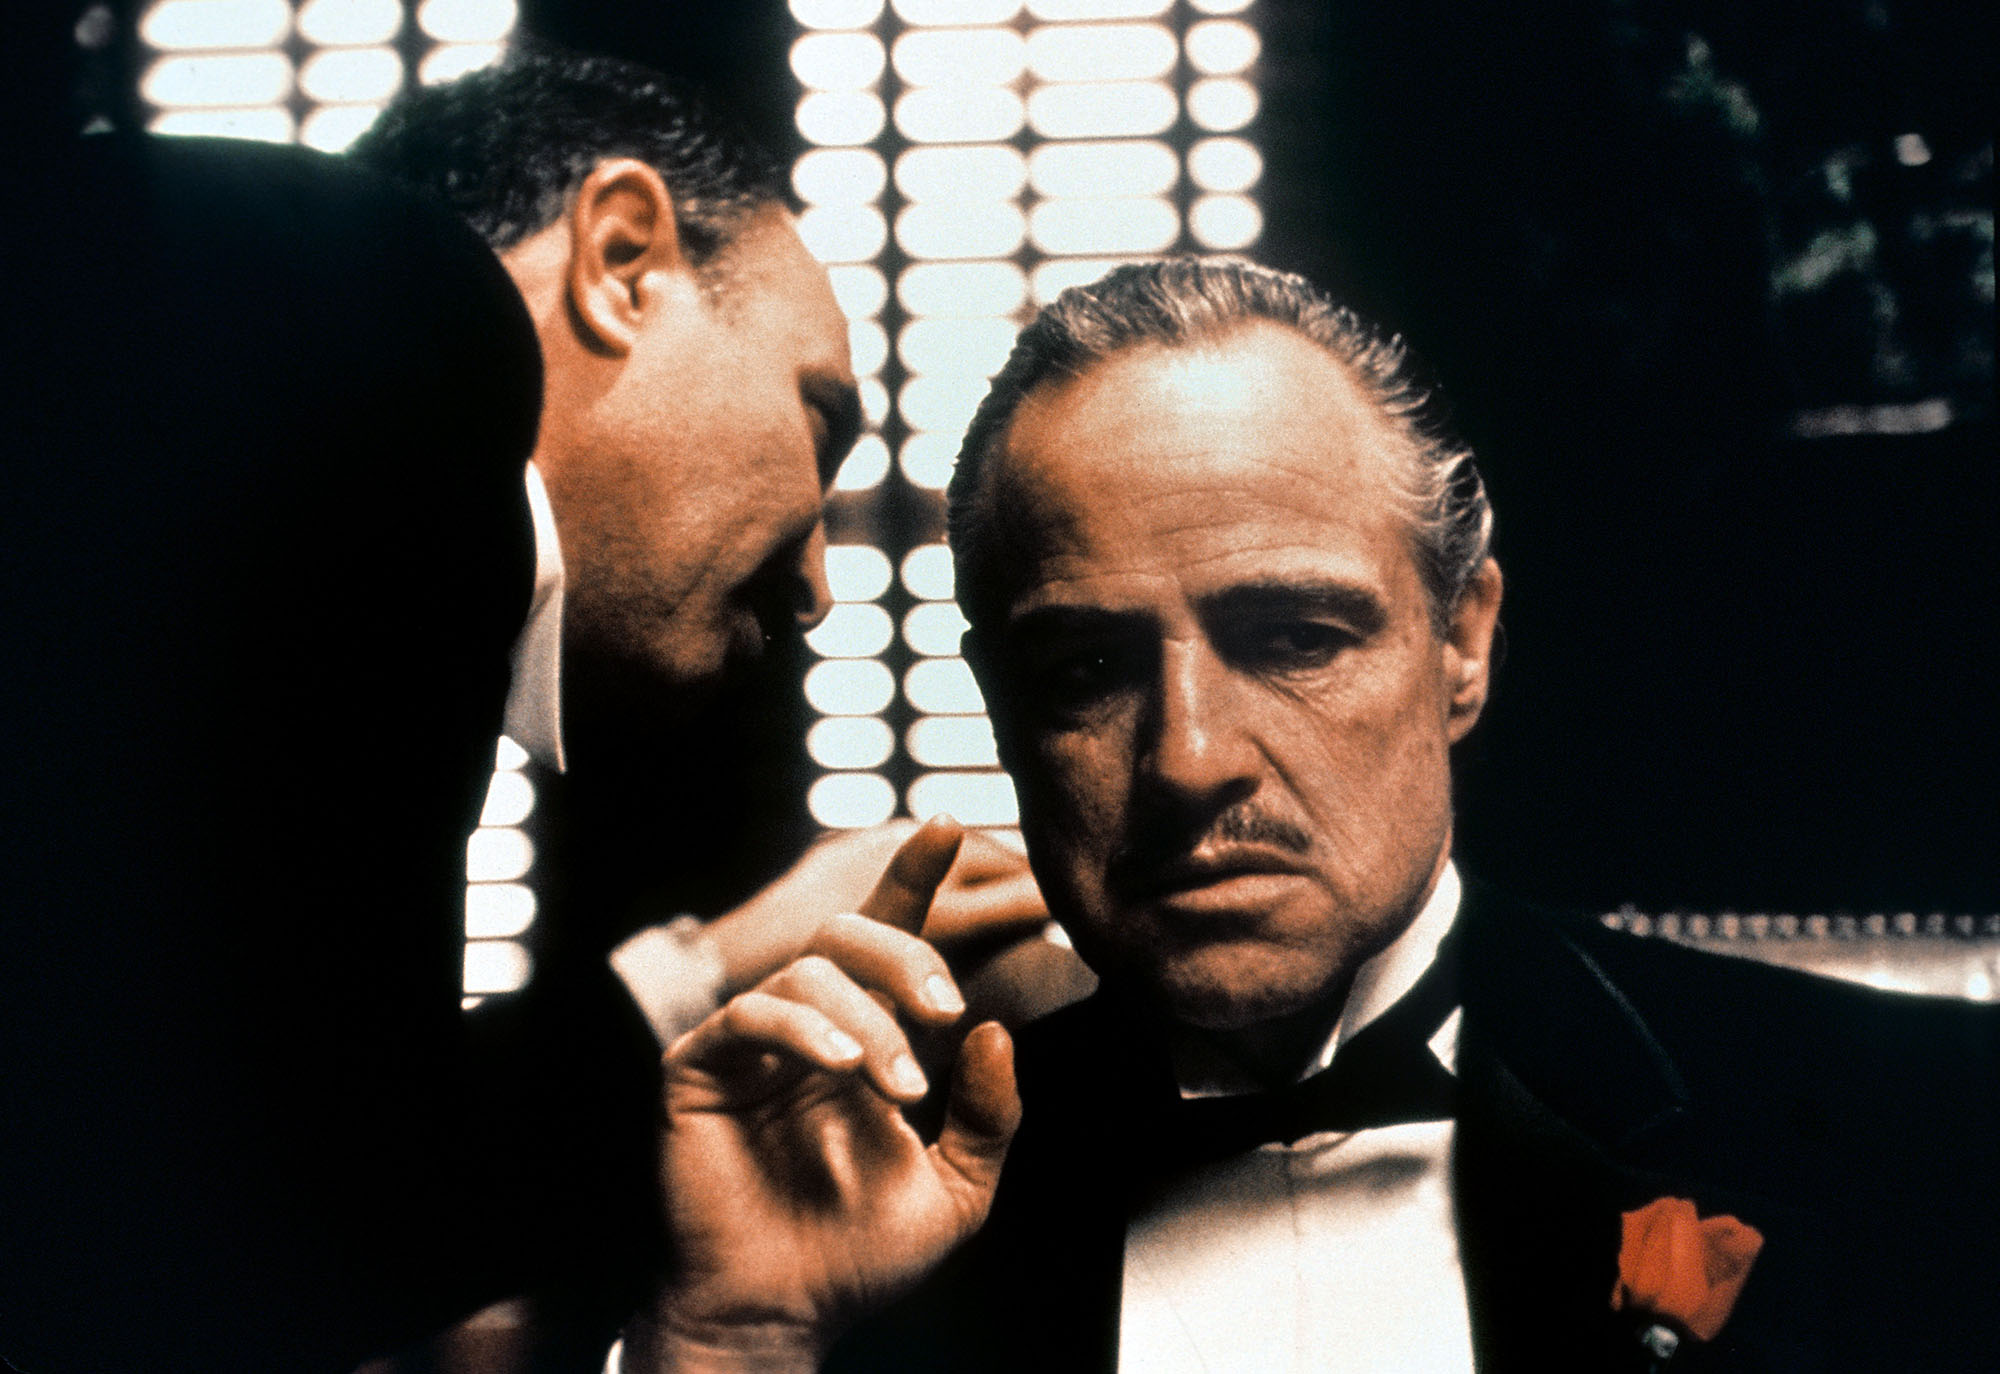 image from the 1972 movie "The Godfather." On the left is Salvatore Corsitto as Amerigo Bonasera. He is whispering into the ear of Vito Corleona (Marlon Brando, seated at a desk and wearing a tuxedo).